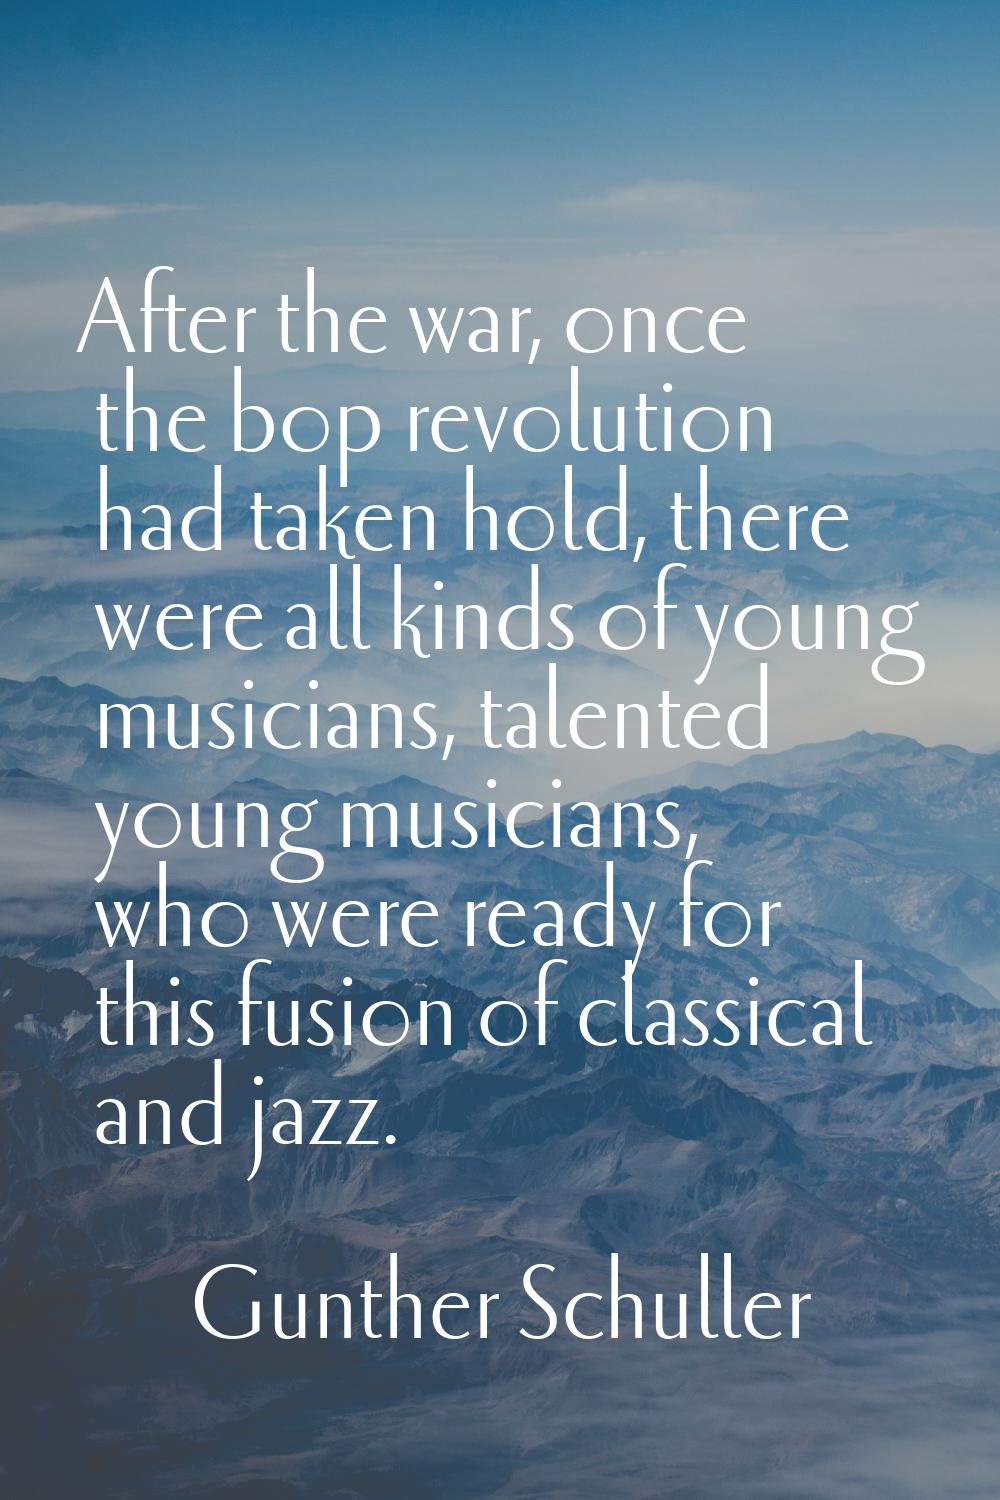 After the war, once the bop revolution had taken hold, there were all kinds of young musicians, tal